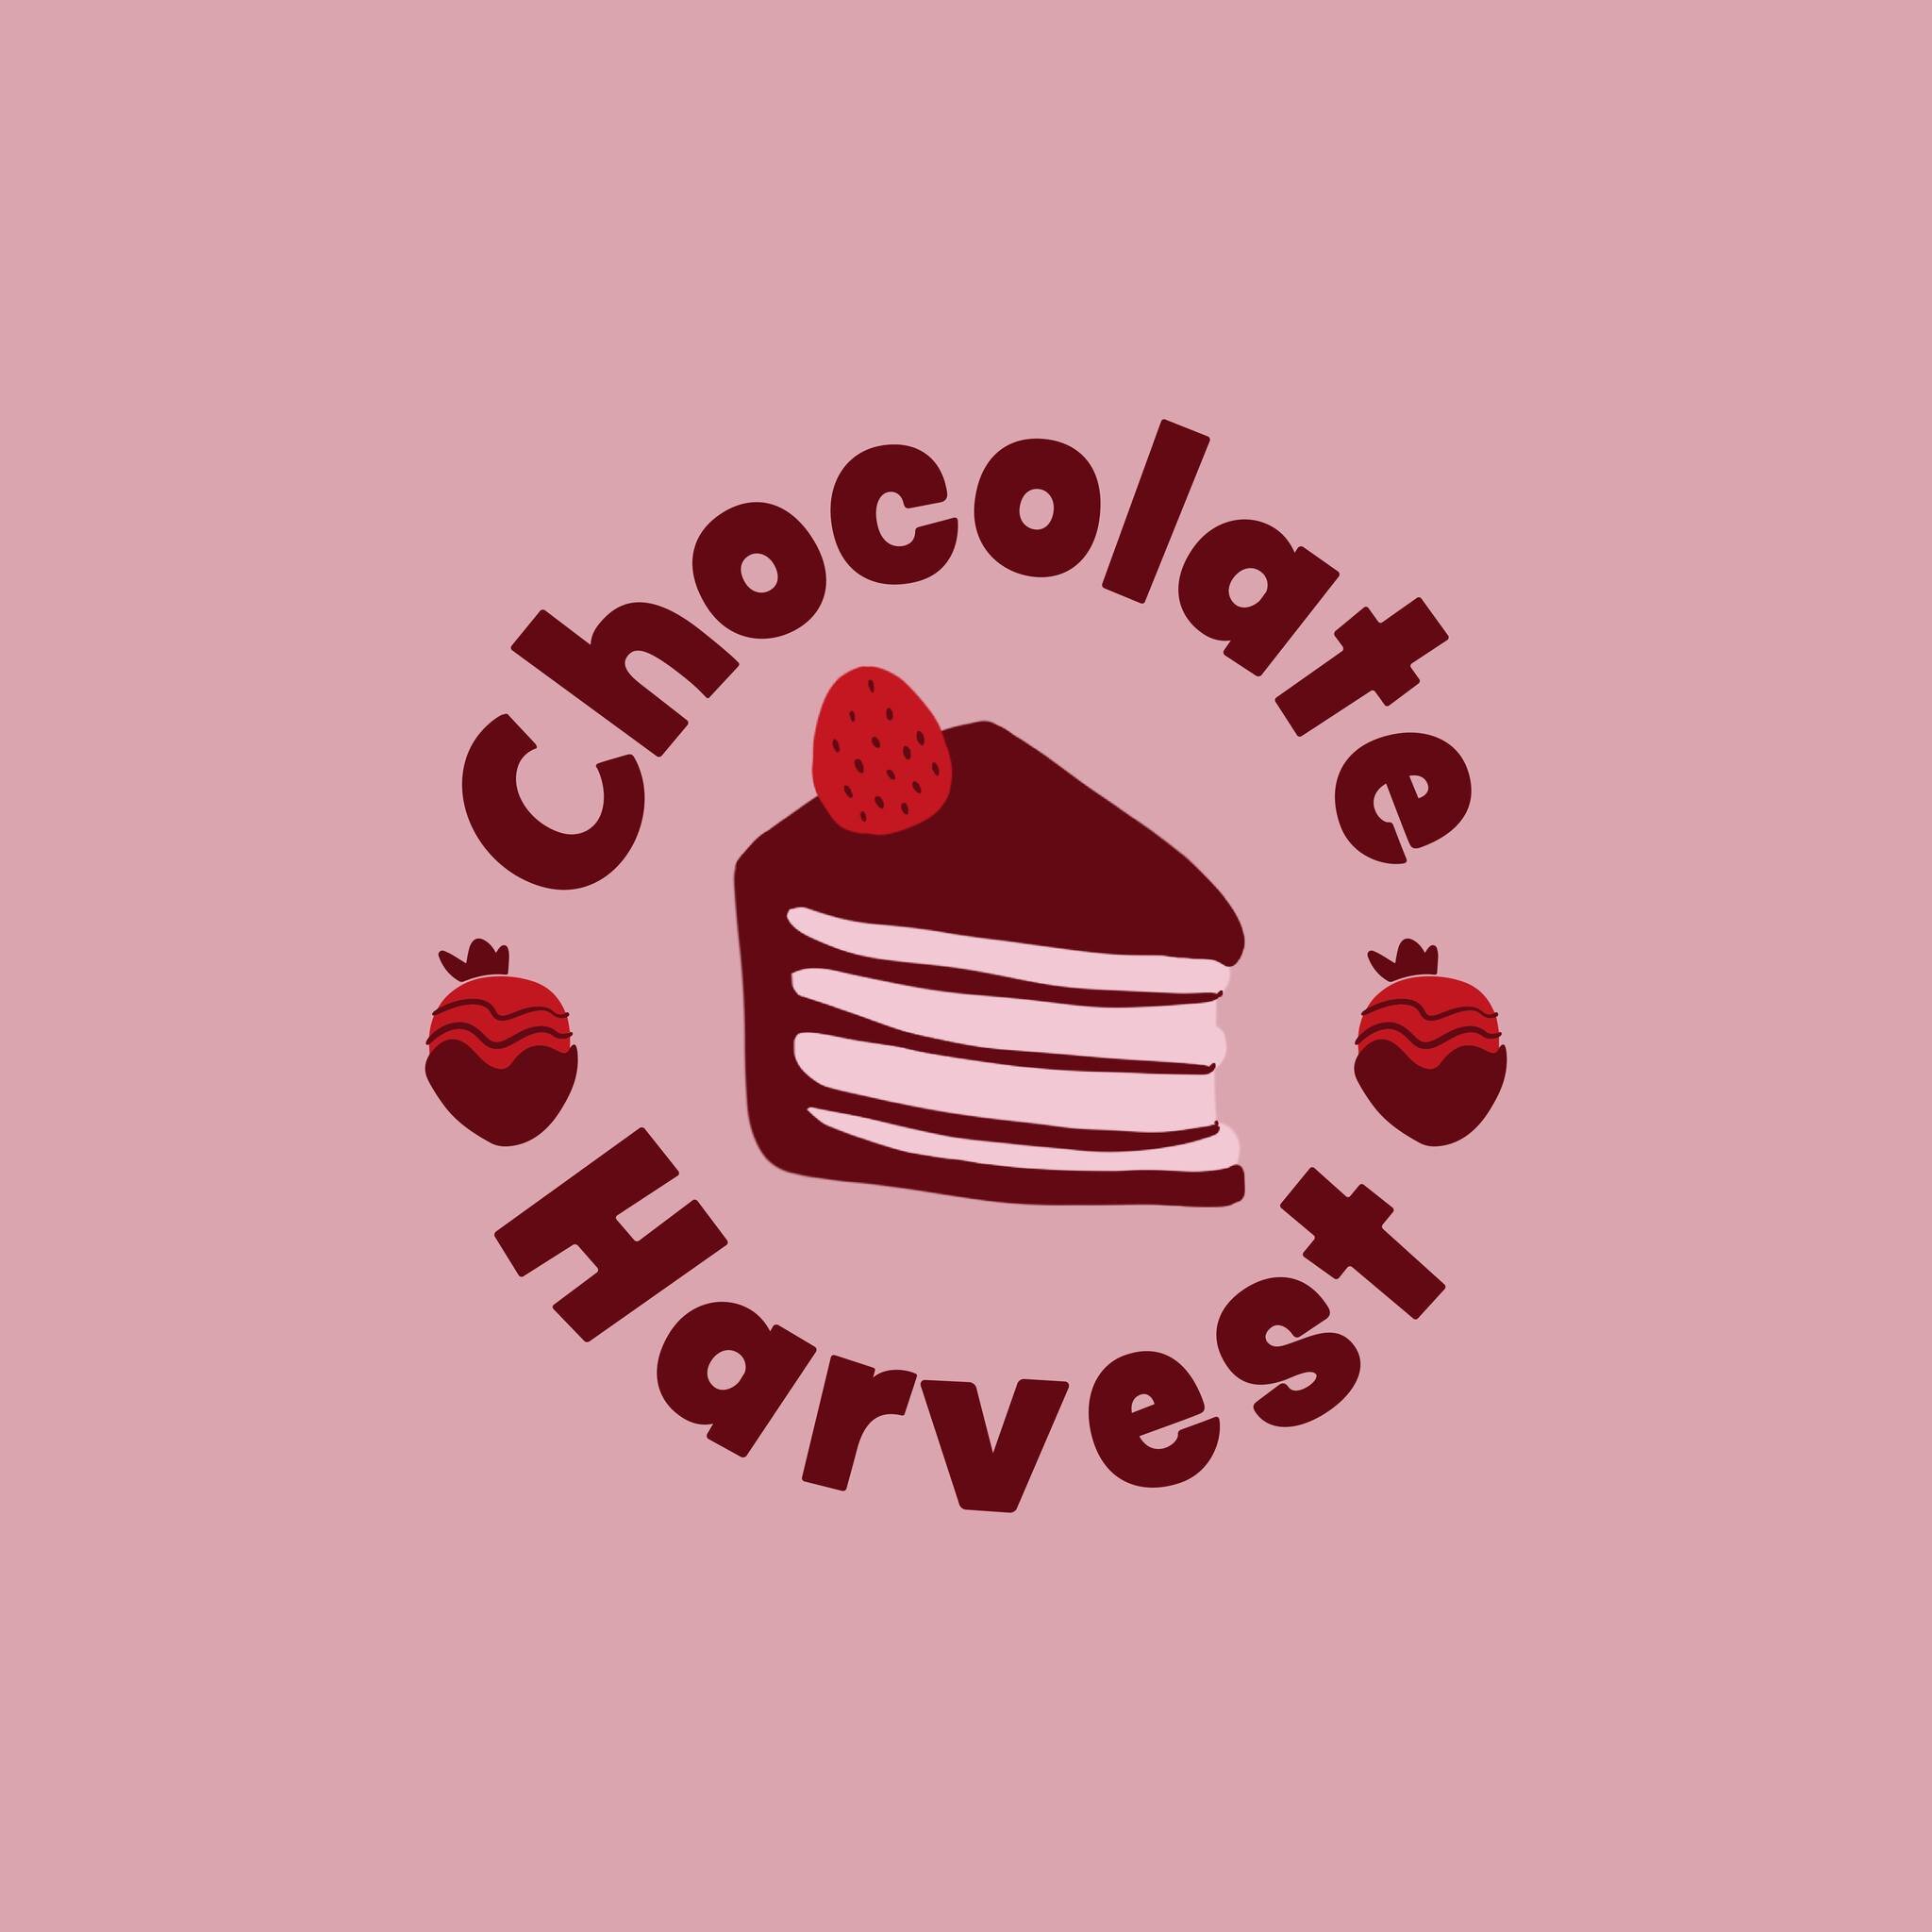 Branding and packaging design for Chocolate Harvest, a dessert company that specializes in chocolate and fruity treats and candies.
#graphicdesign #brandingdesign #logodesign #packagingdesign #freelancedesigner #illustration #procreateart #adobeillus